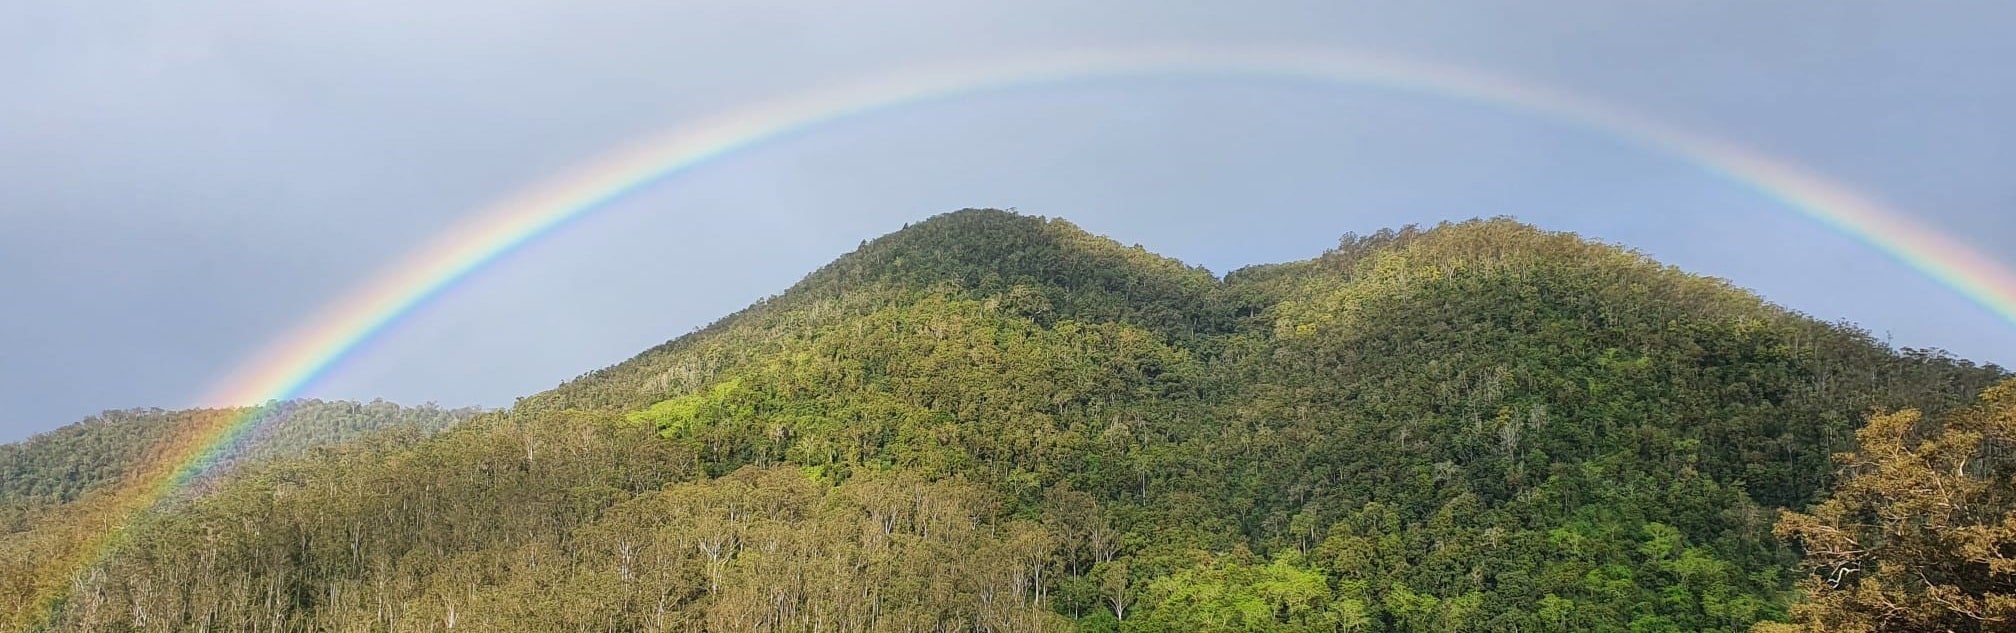 Rainbow over Camel’s Hump Conservation reserve.